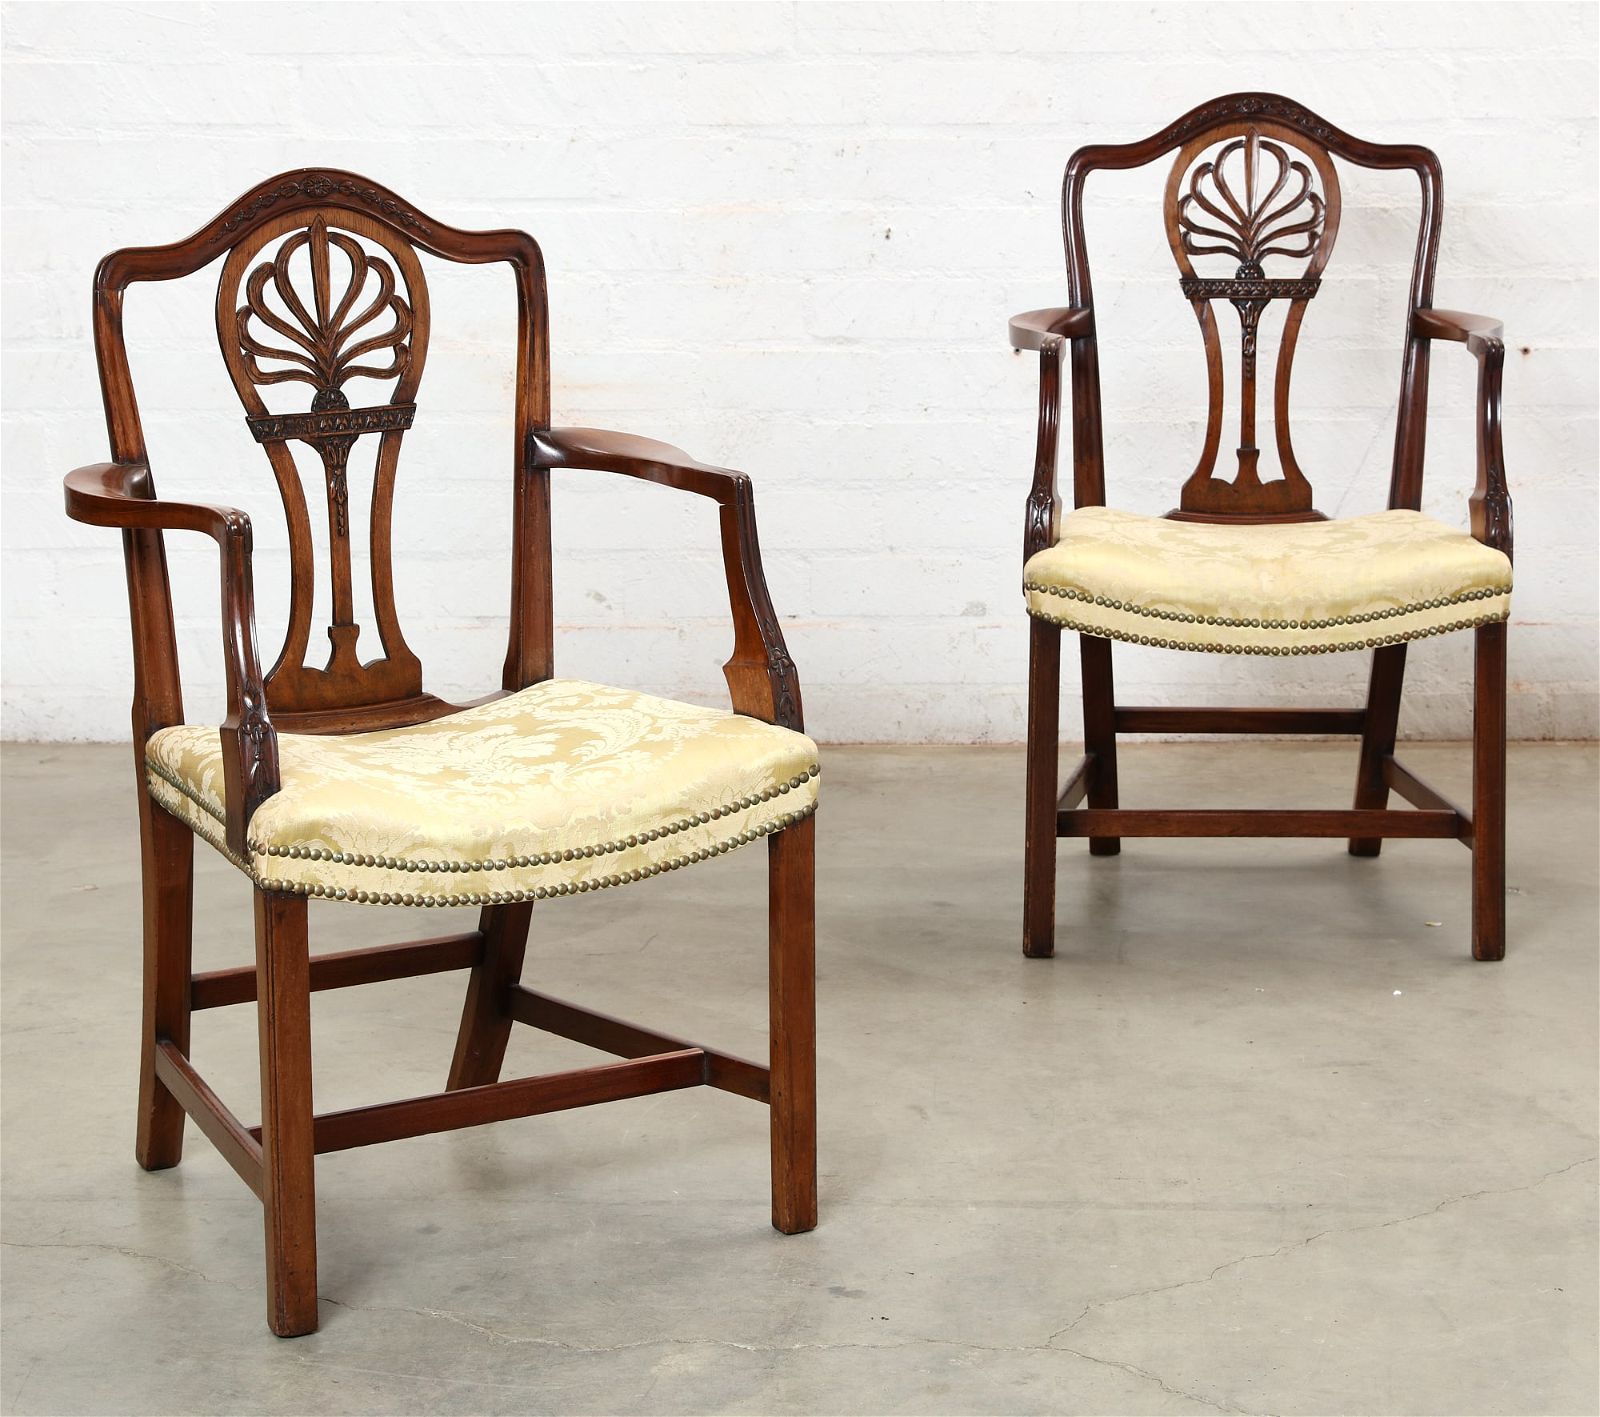 A PAIR OF GEORGE III STYLE MAHOGANY